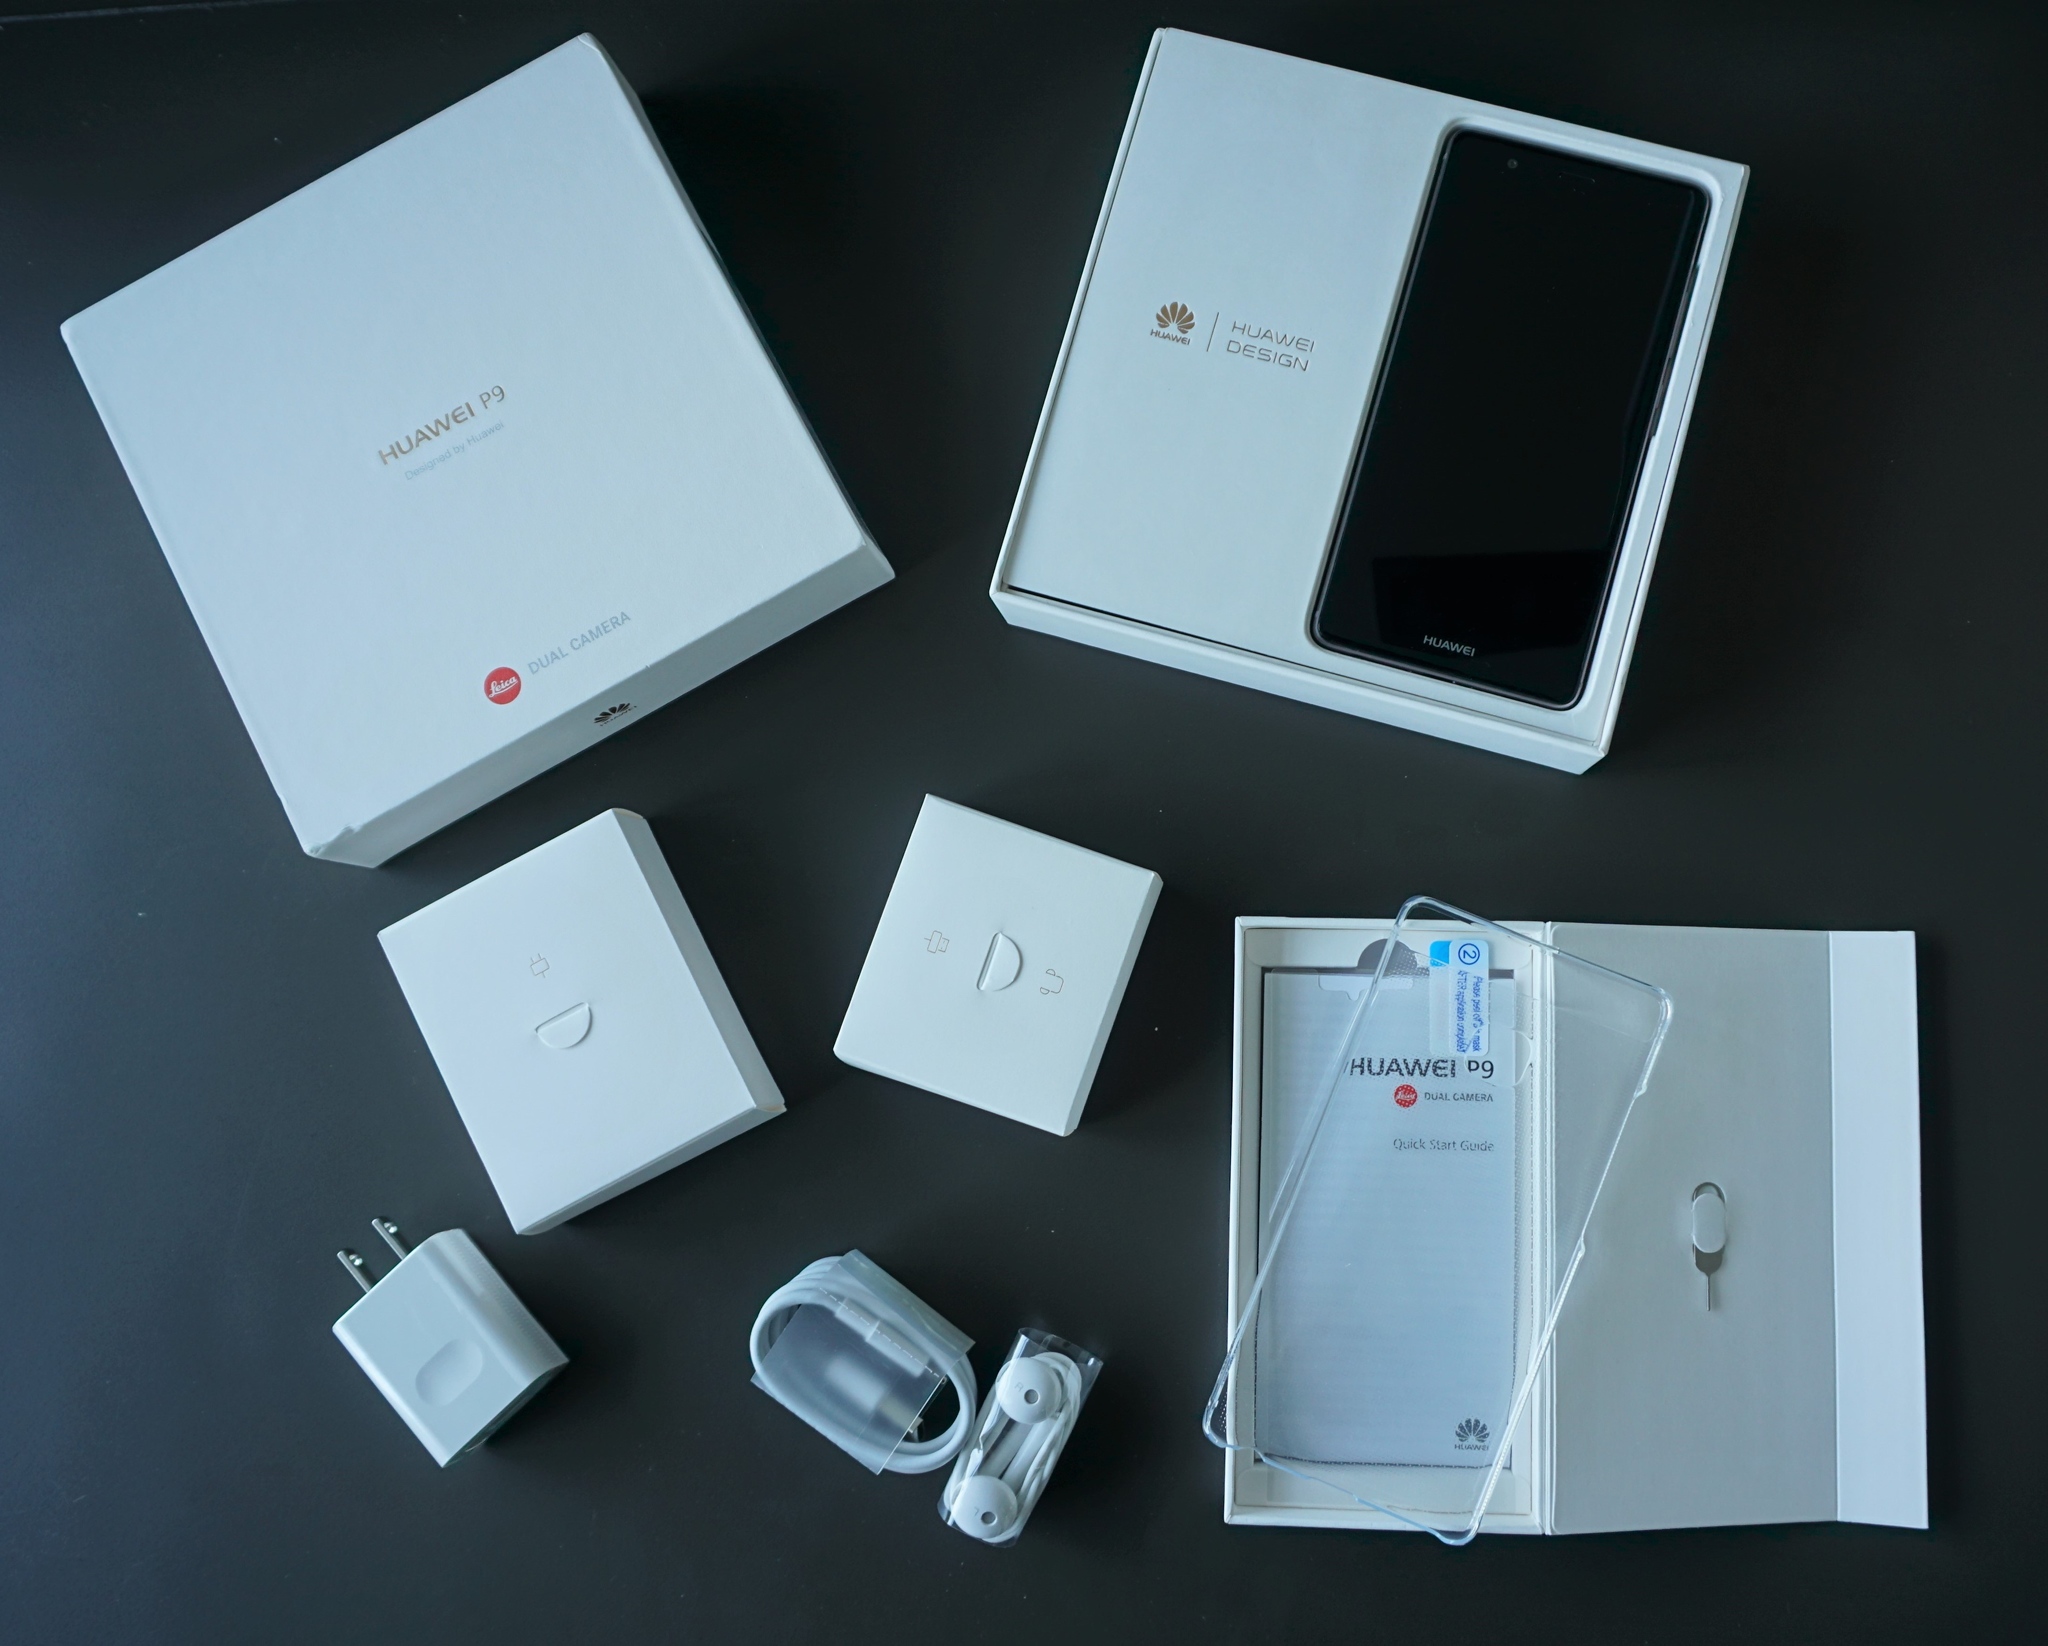 Huawei P9 Packaging comes with USB Type-C charger, earphones, backcover and screen protector